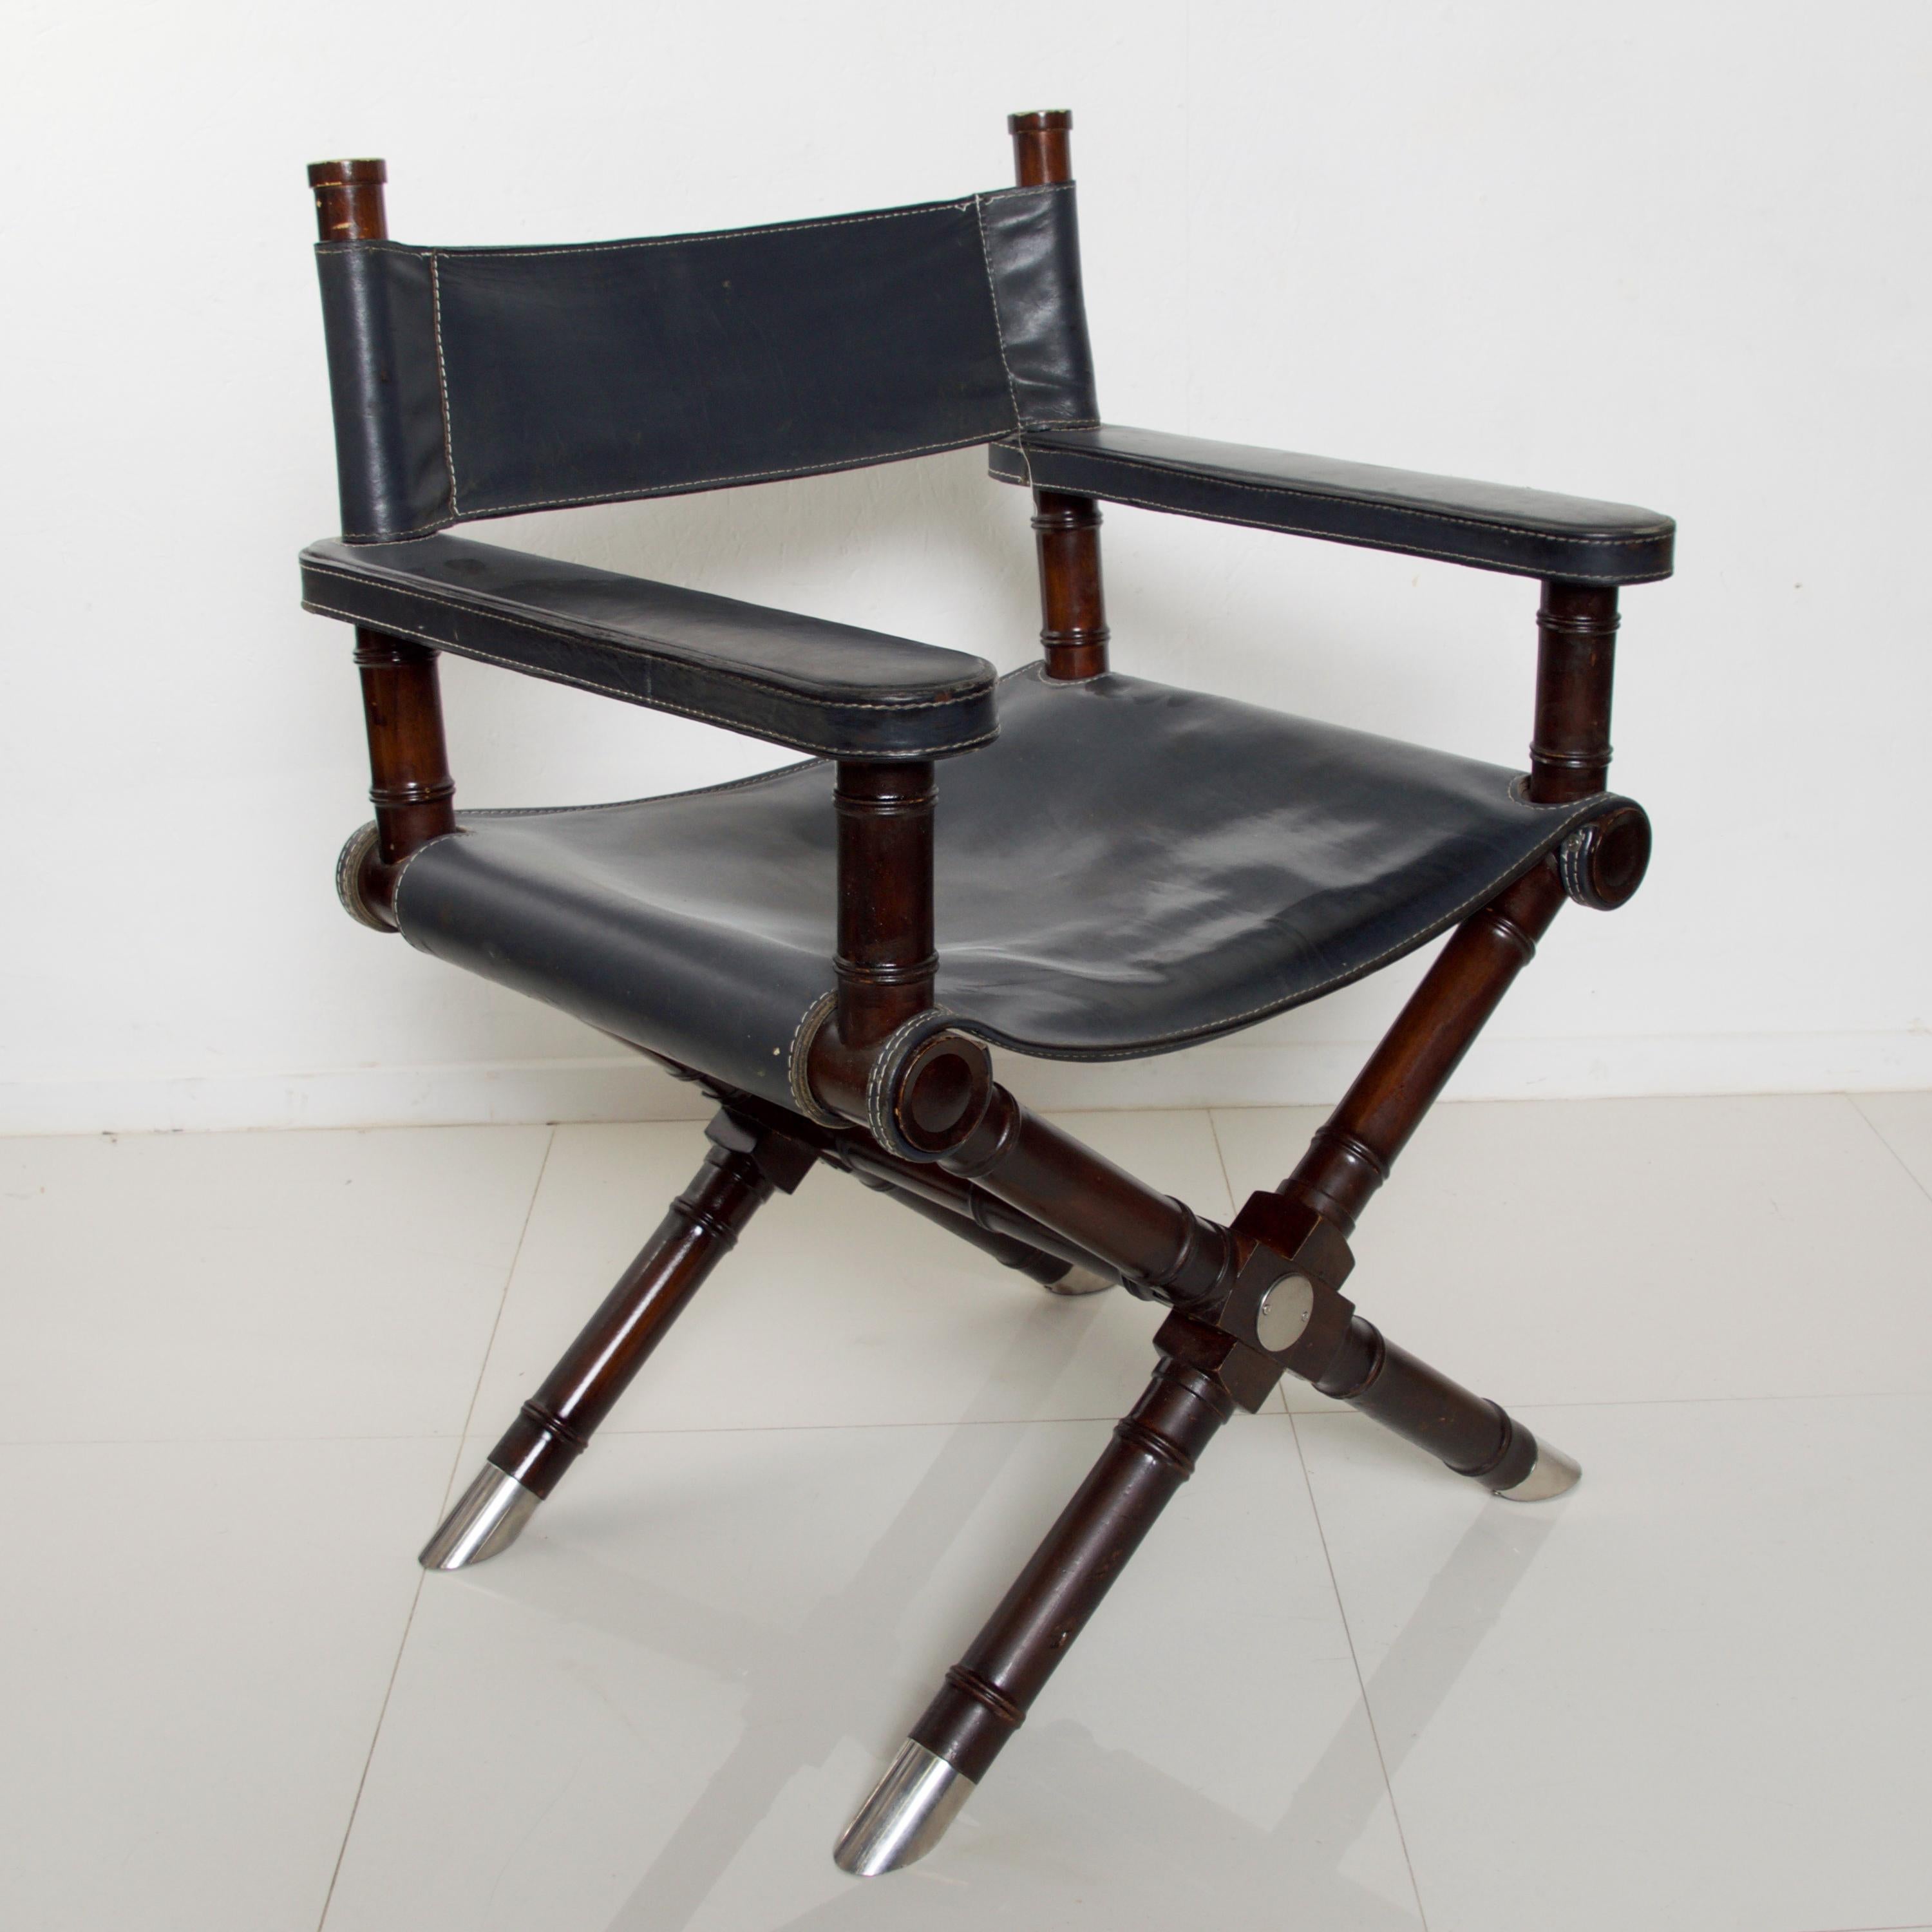 Presenting Ralph Lauren Leather Hollywood Director's Chair Vintage in Classic Navy Blue
Equestrian inspired European Leather Seat on Exotic Rich Wood Cross Braced Mahogany X Frame with Standout Chrome Leg Sabots.
Fabulous comfort and style-a